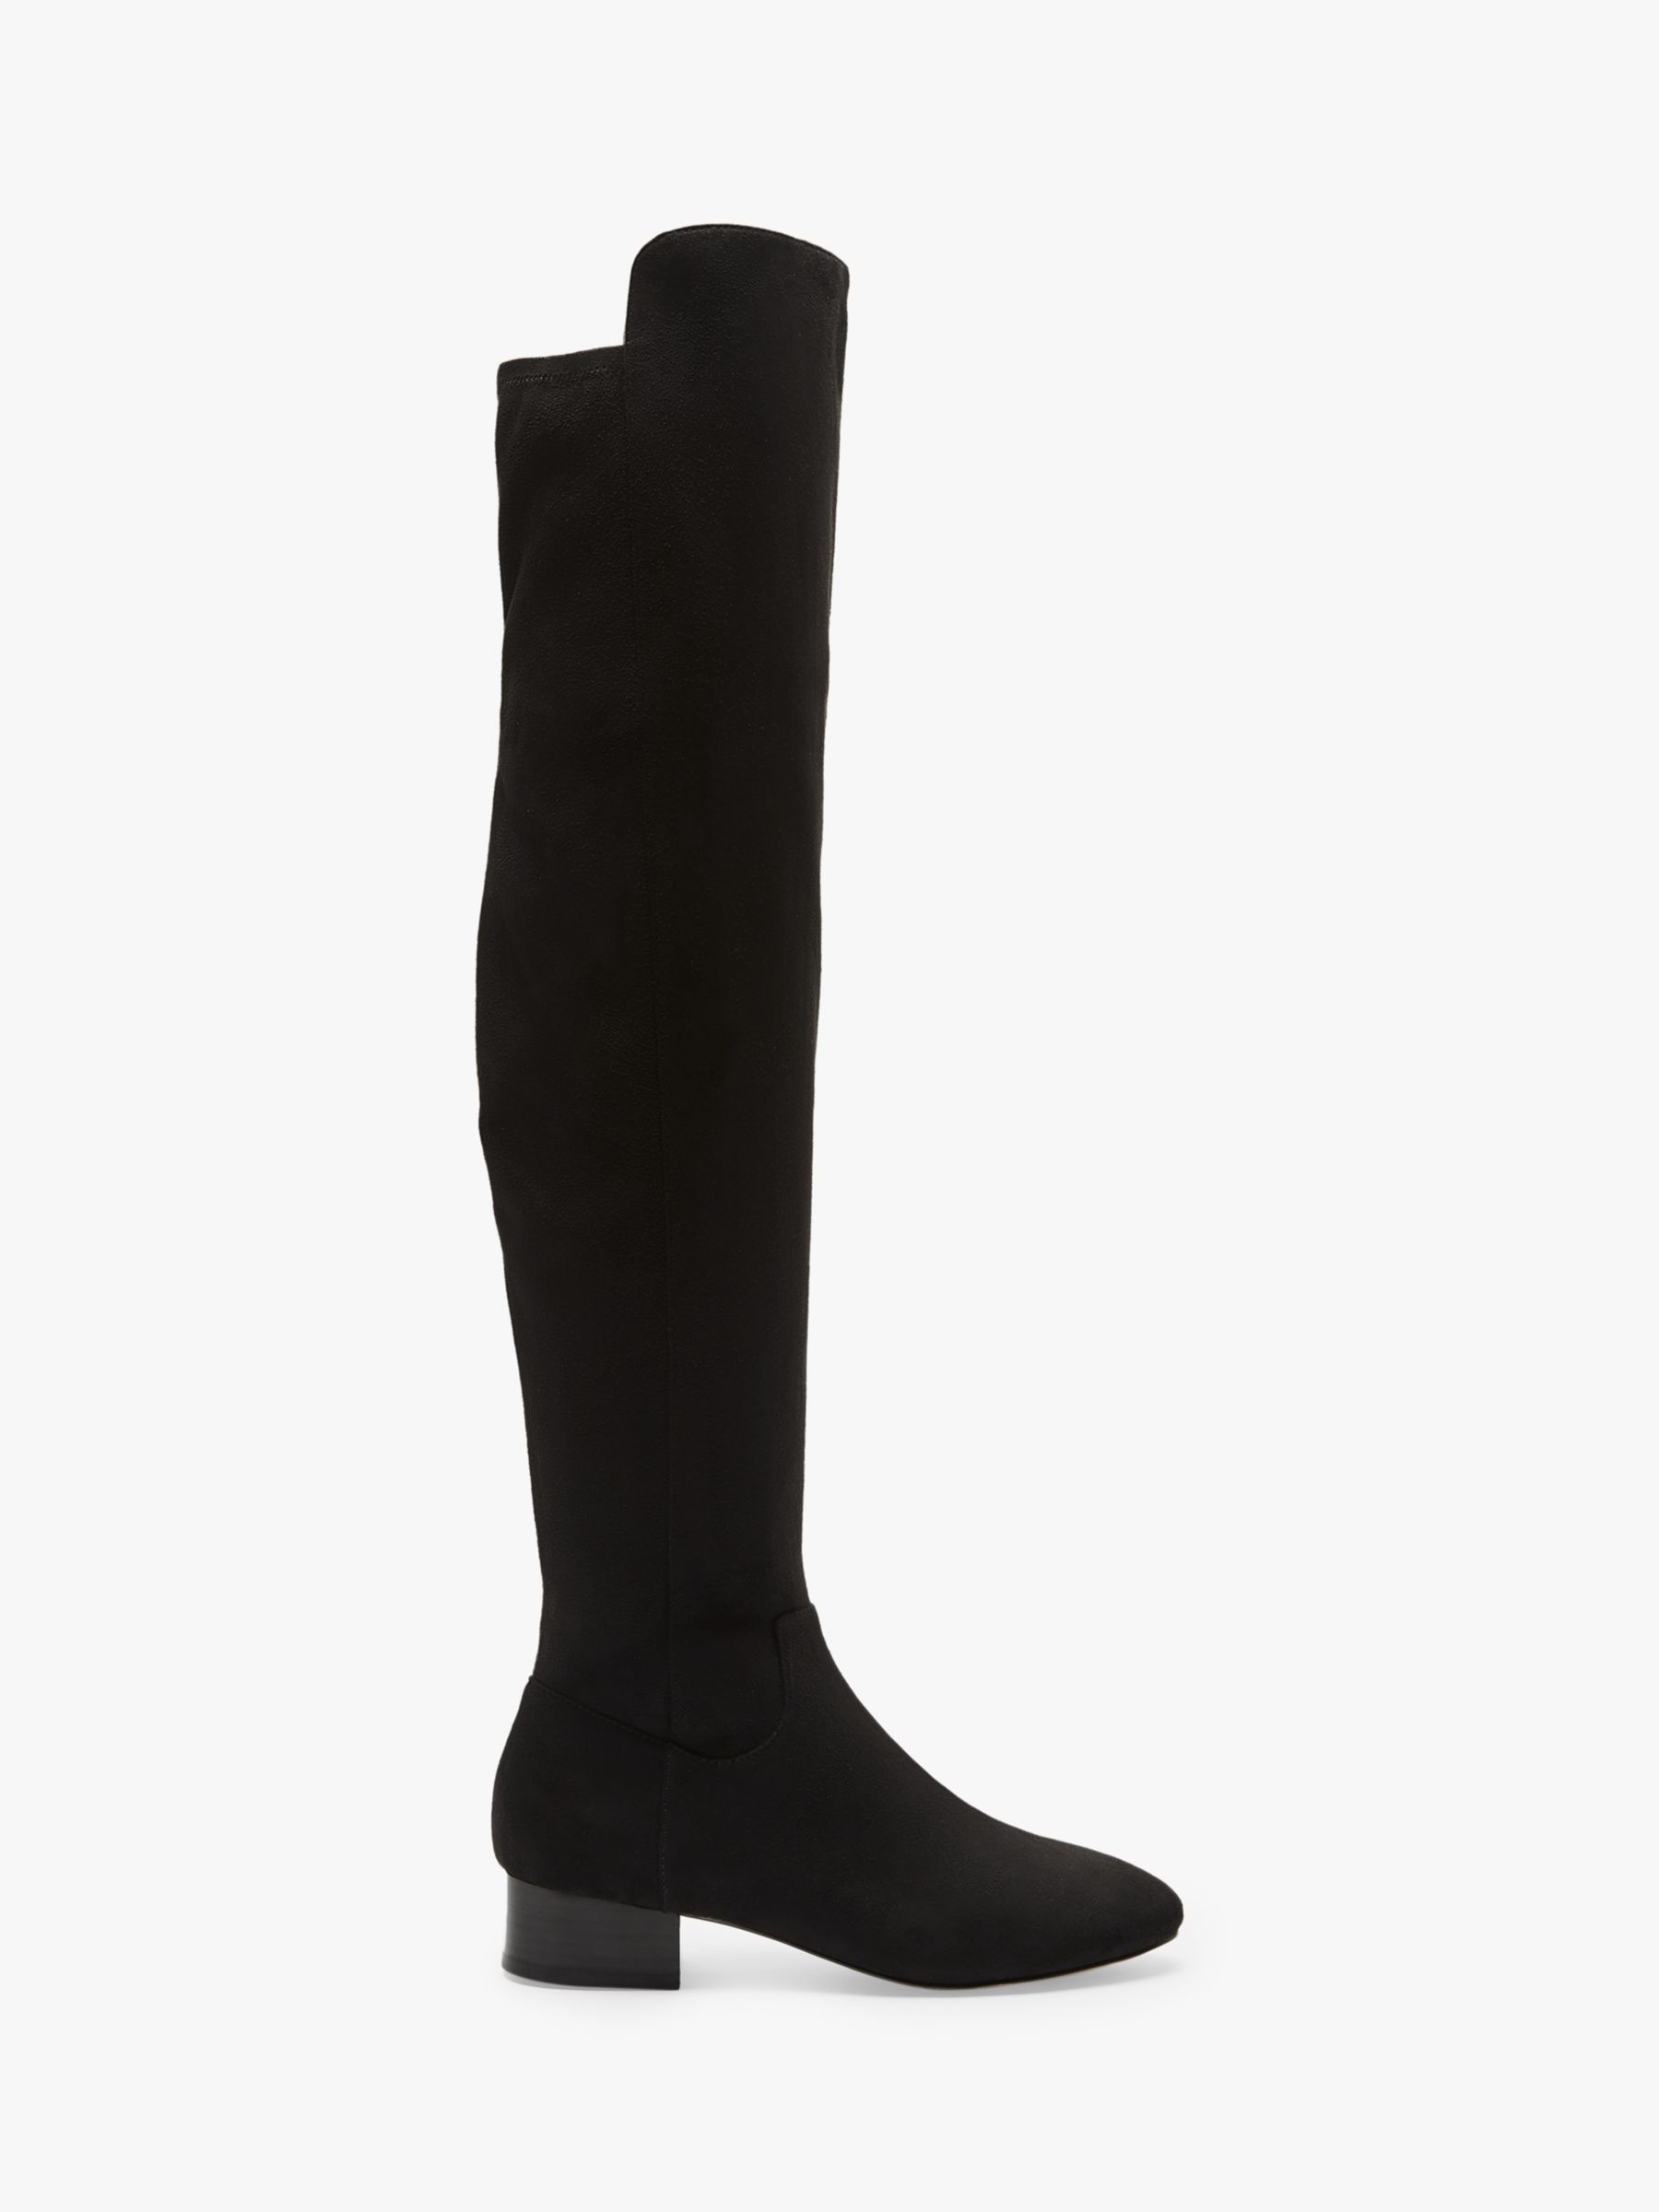 Boden Stretch Over The Knee Boots, Black